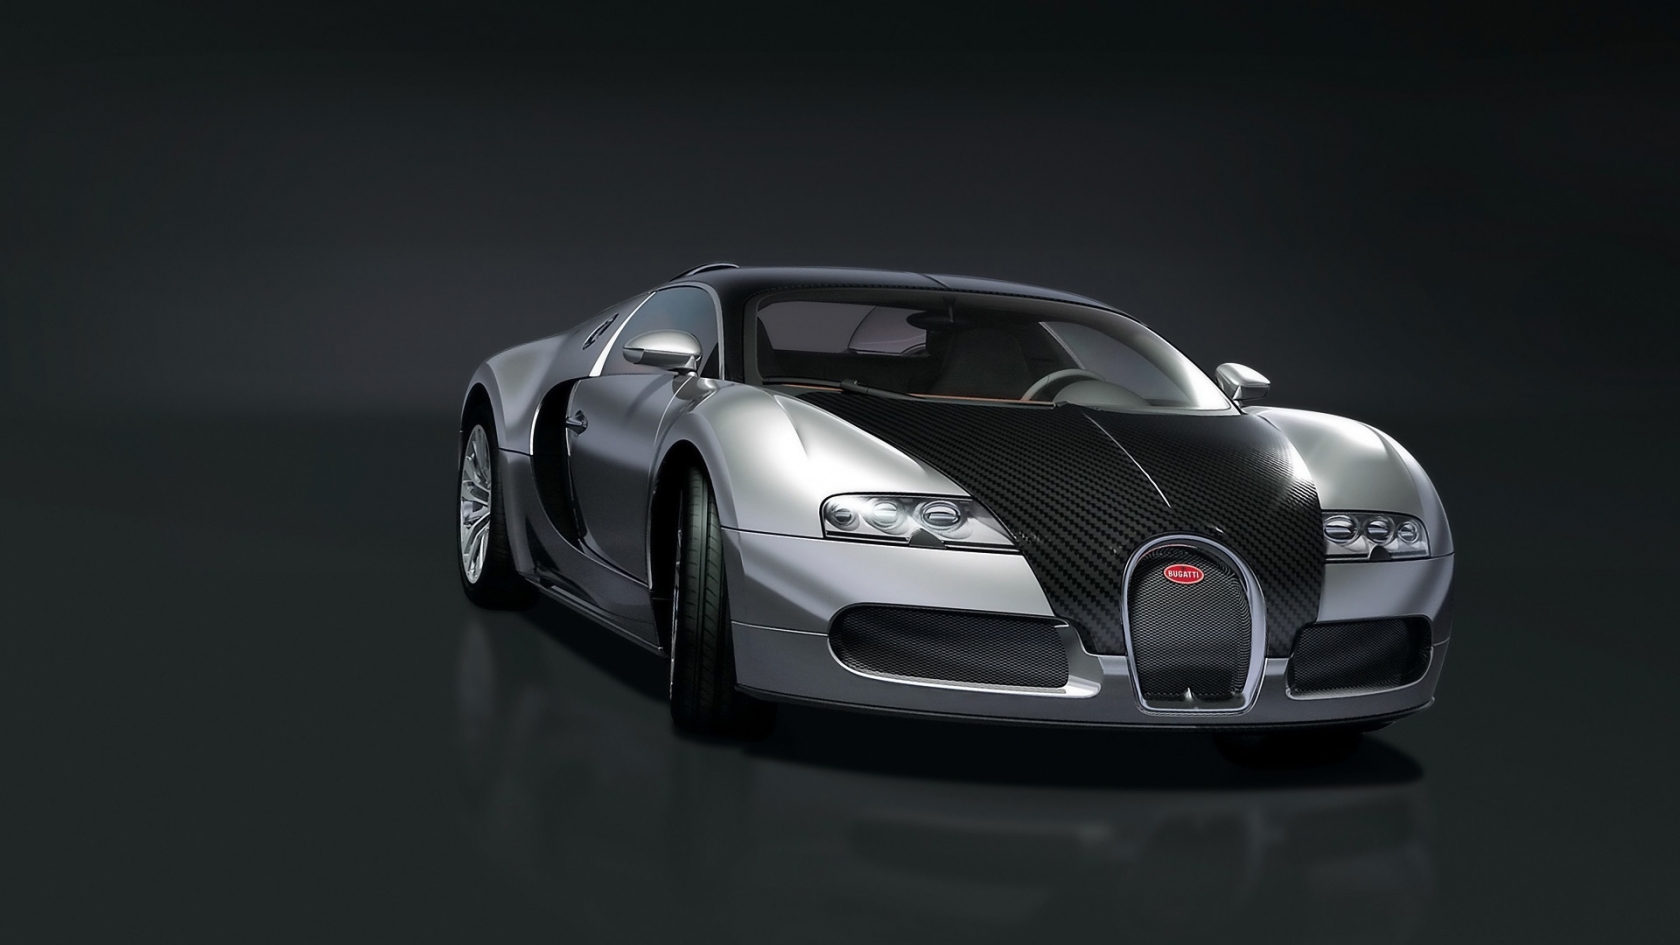 Bugatti EB 16.4 Veyron Pur Sang 2008 - Front Angle for 1680 x 945 HDTV resolution